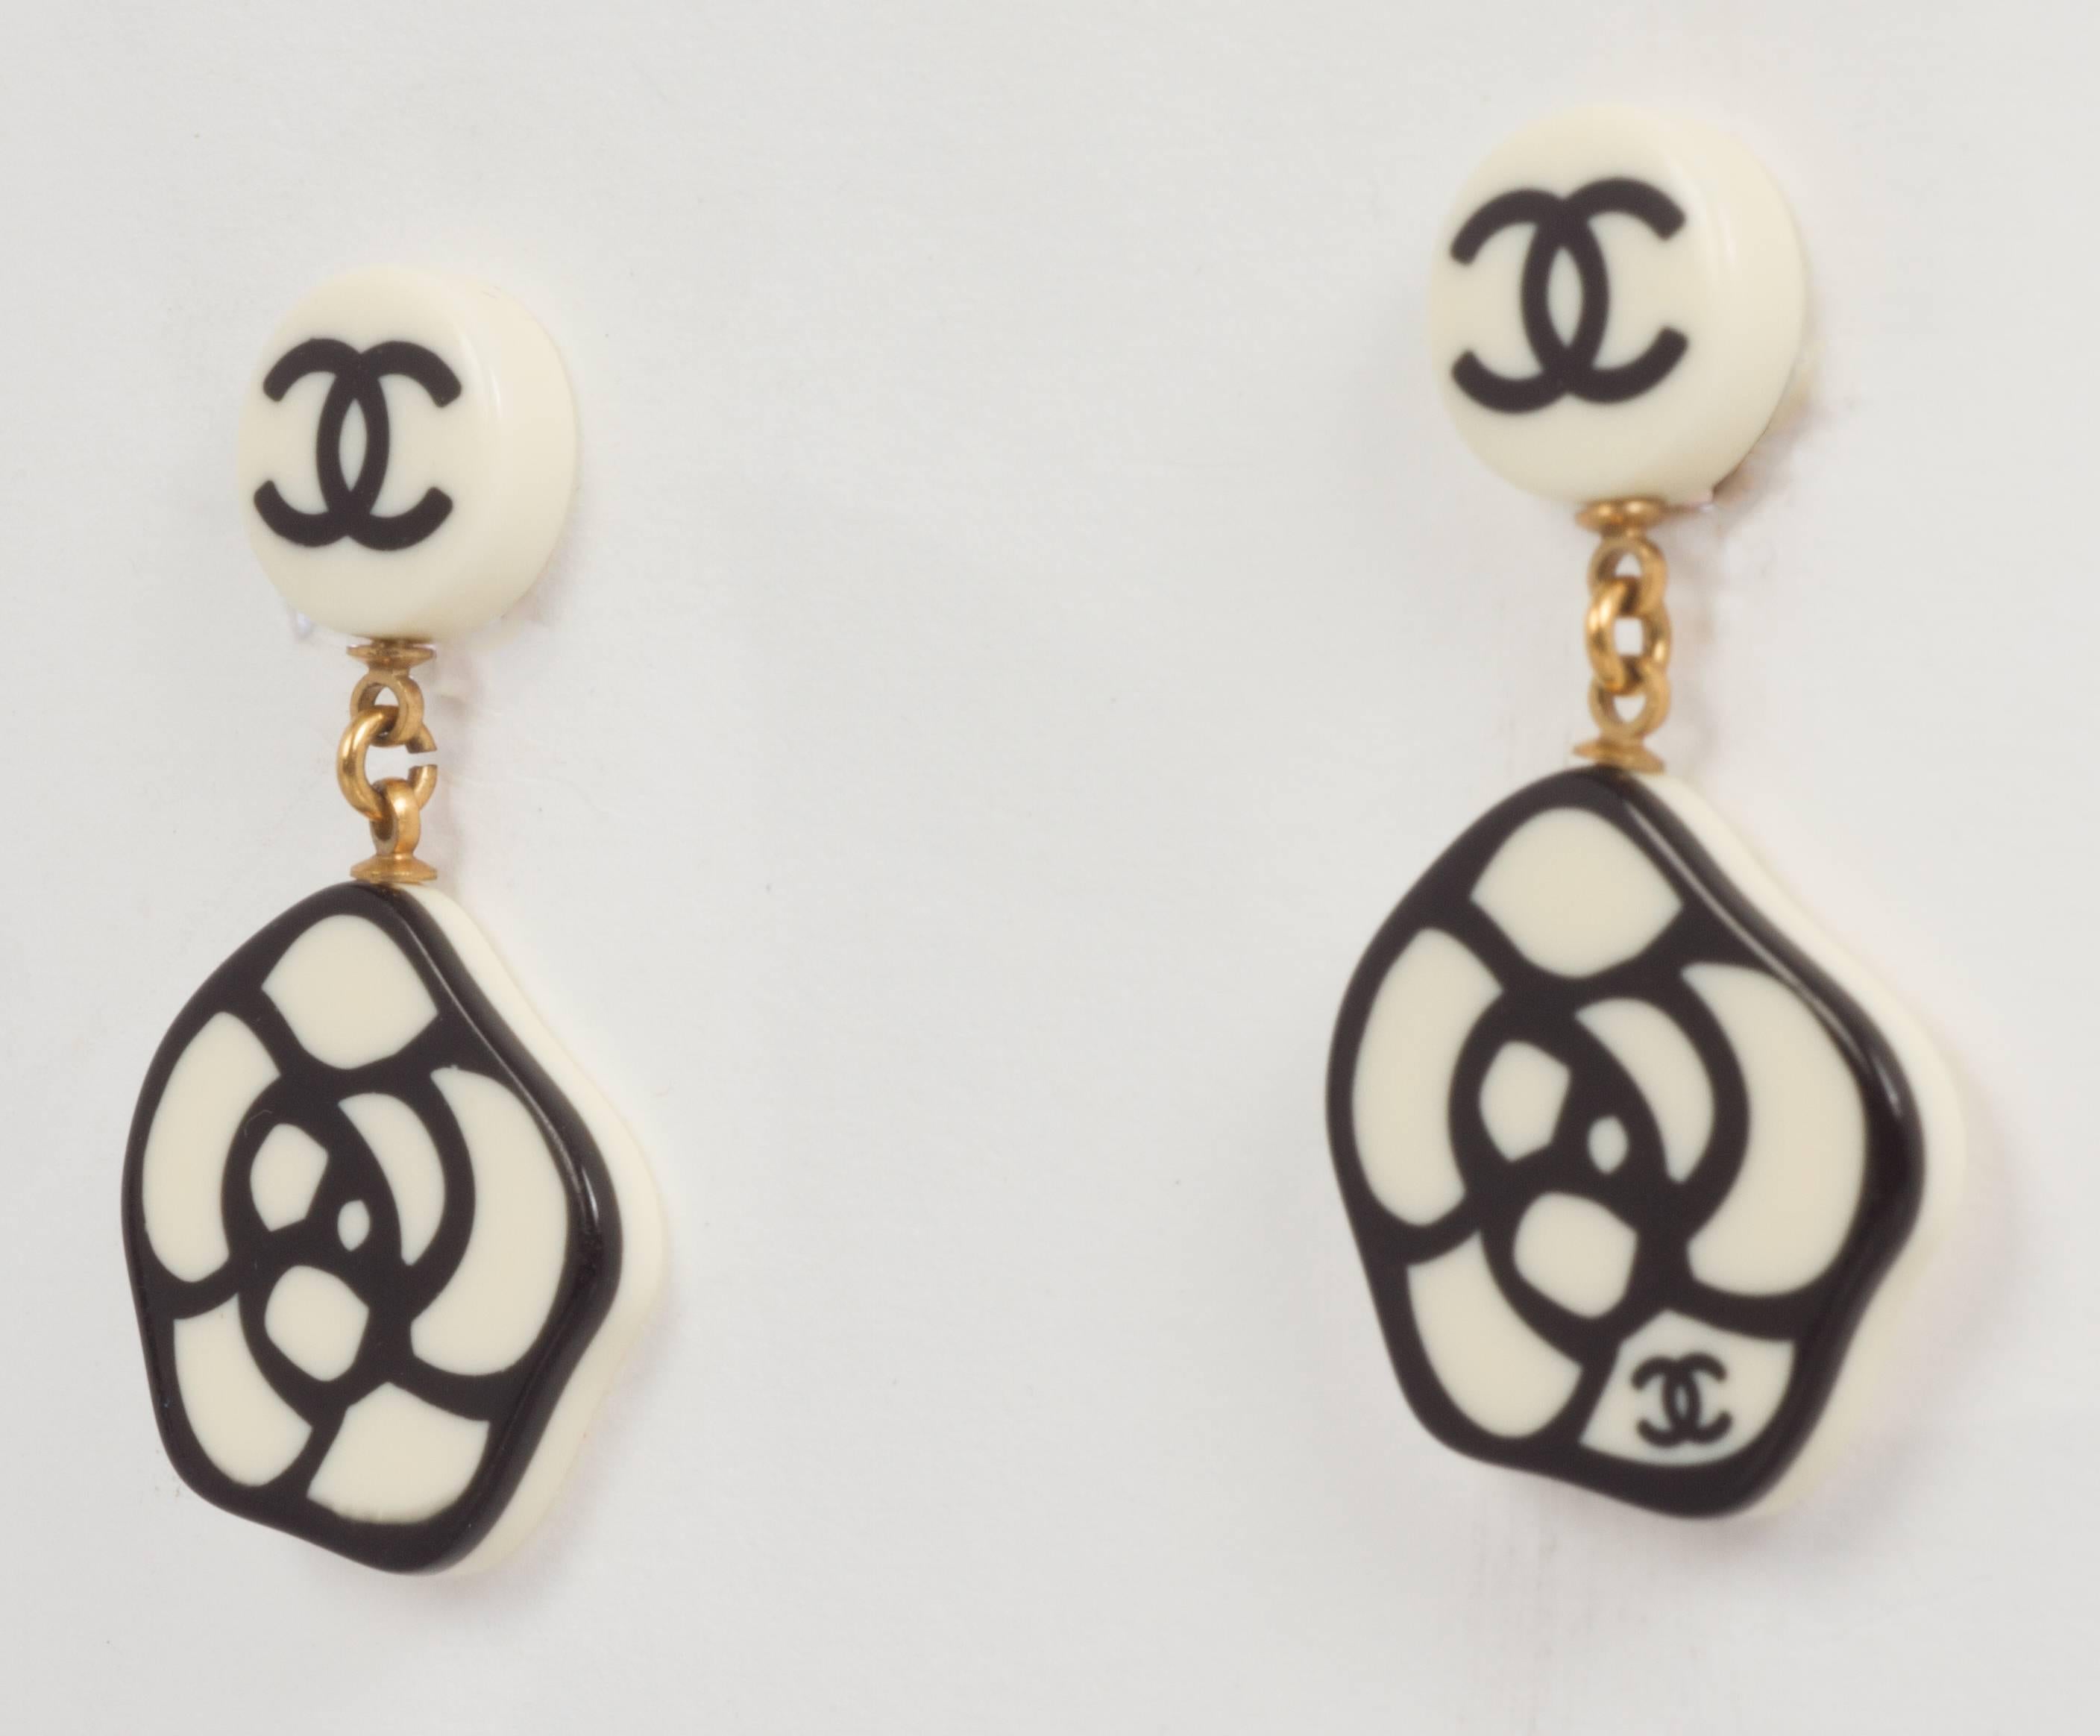 From the Spring 2003 collection, these CHANEL earrings have a  fun and youthful look